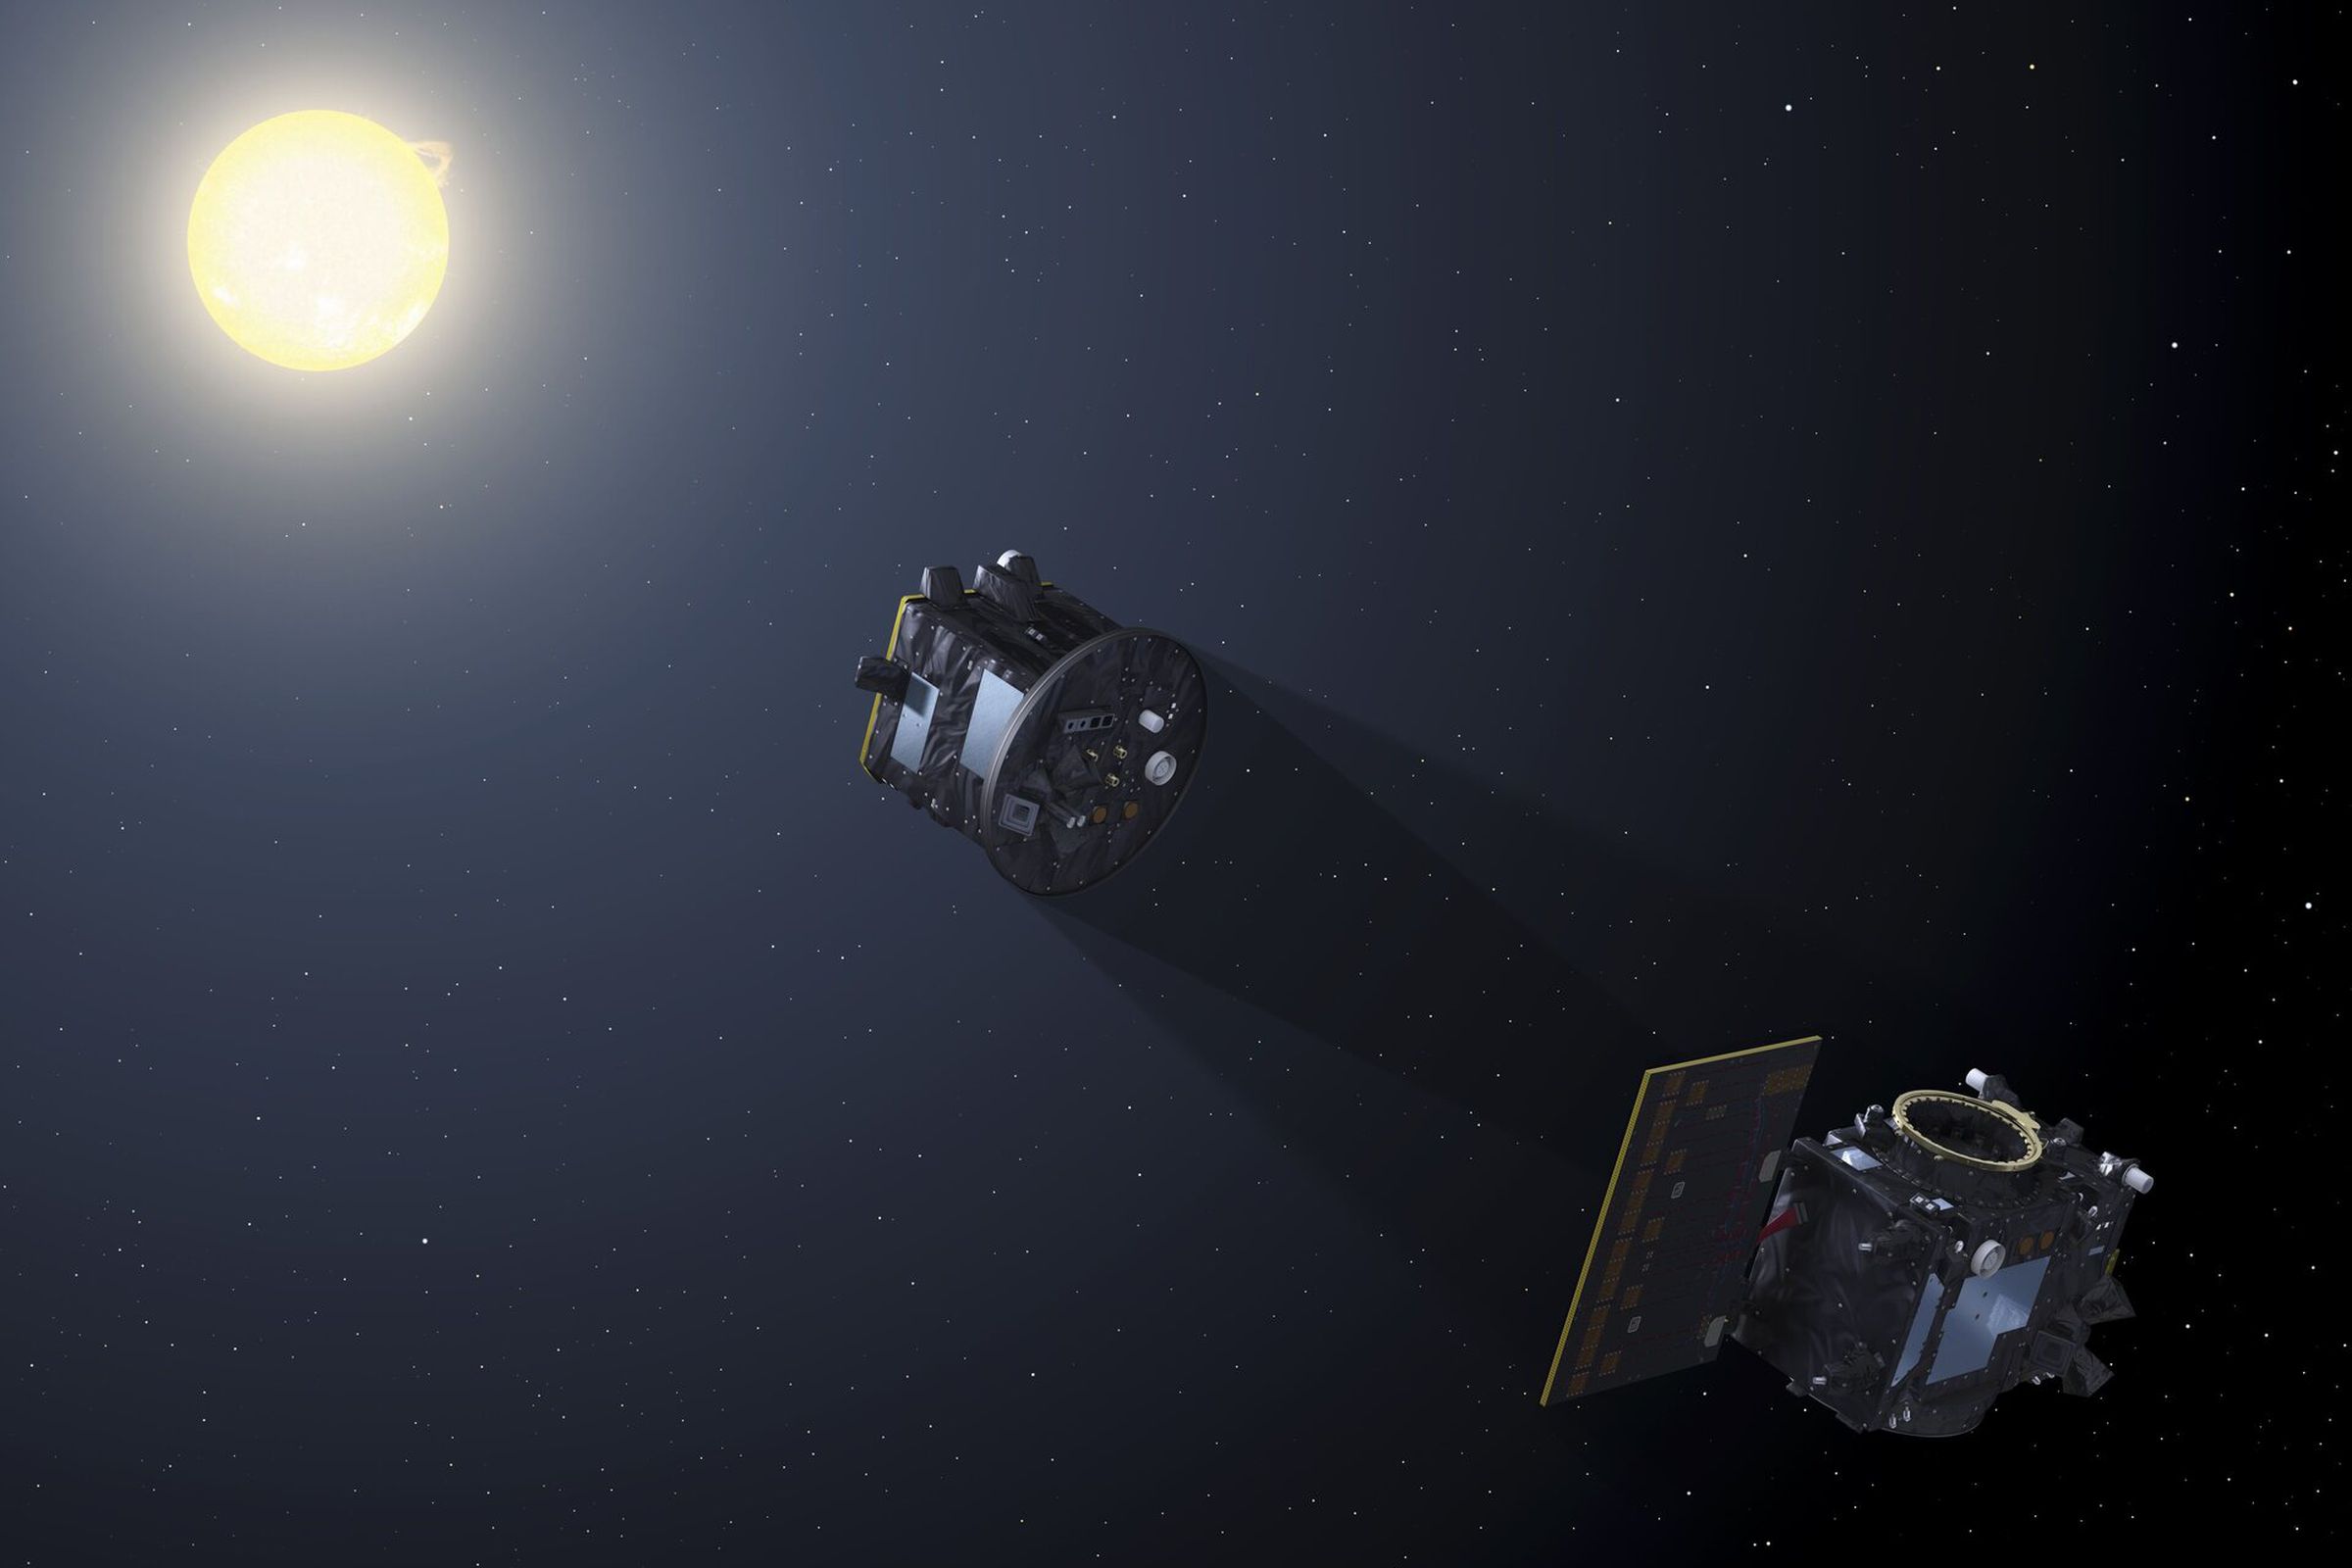 Proba-3's occulter blocks the Sun’s light for the coronagraph. Image: European Space Agency